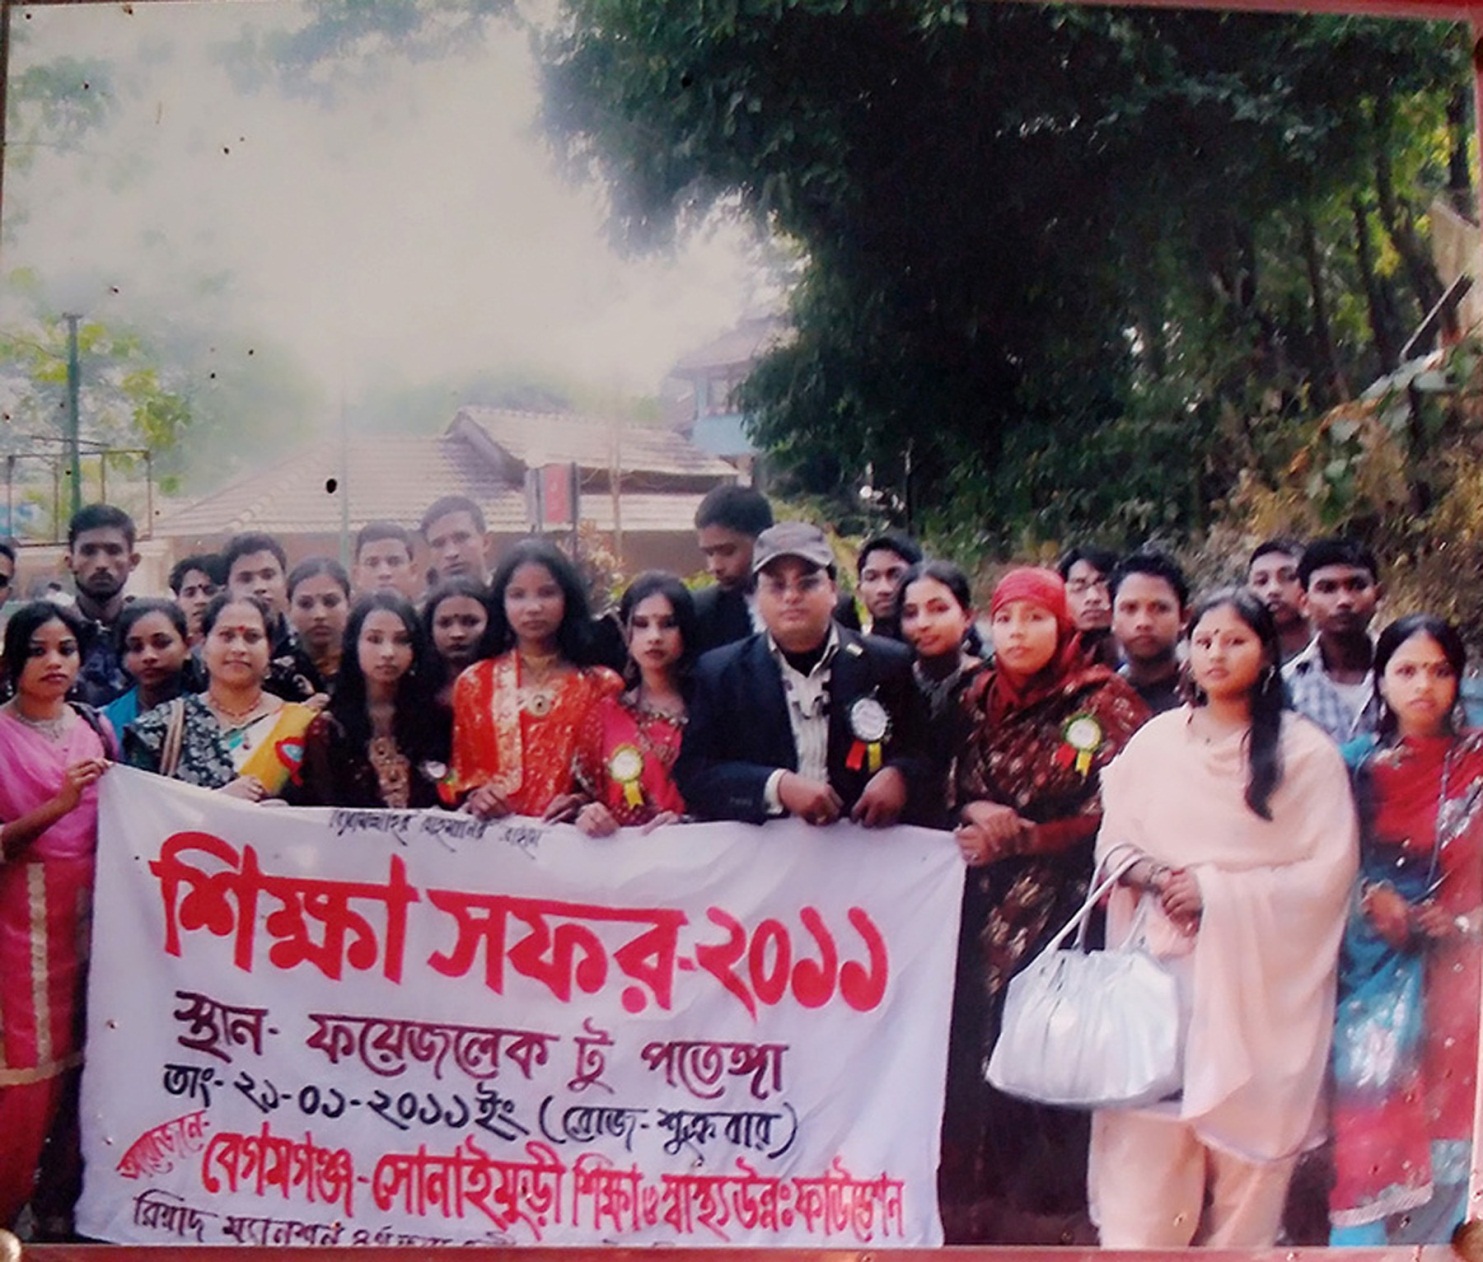 In the Pictrue- Chairman of Begamganj-Sonaimuri Shikkha O Sastha Unnayan Foundation and Begumganj Technical and Computer Institute Principal Gias Uddin Mithu to meet with students on the occasion of Education Tour’ 2011